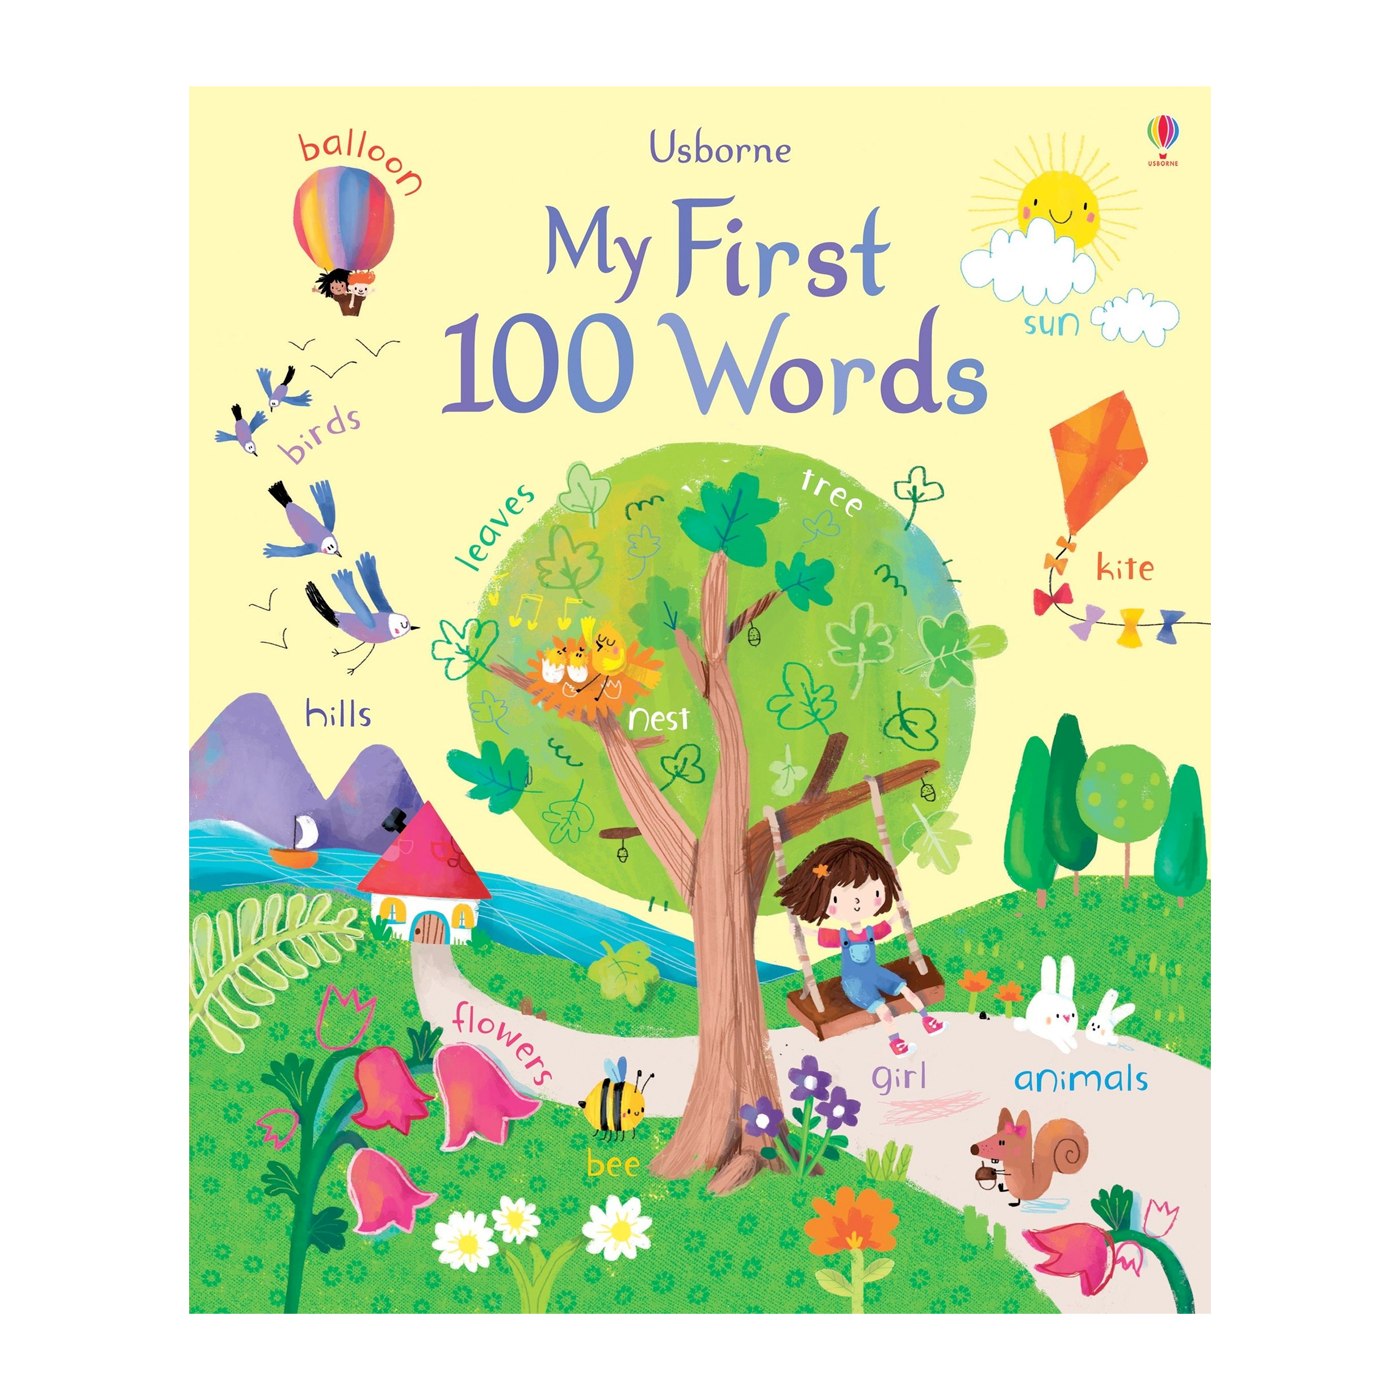  My First 100 Words